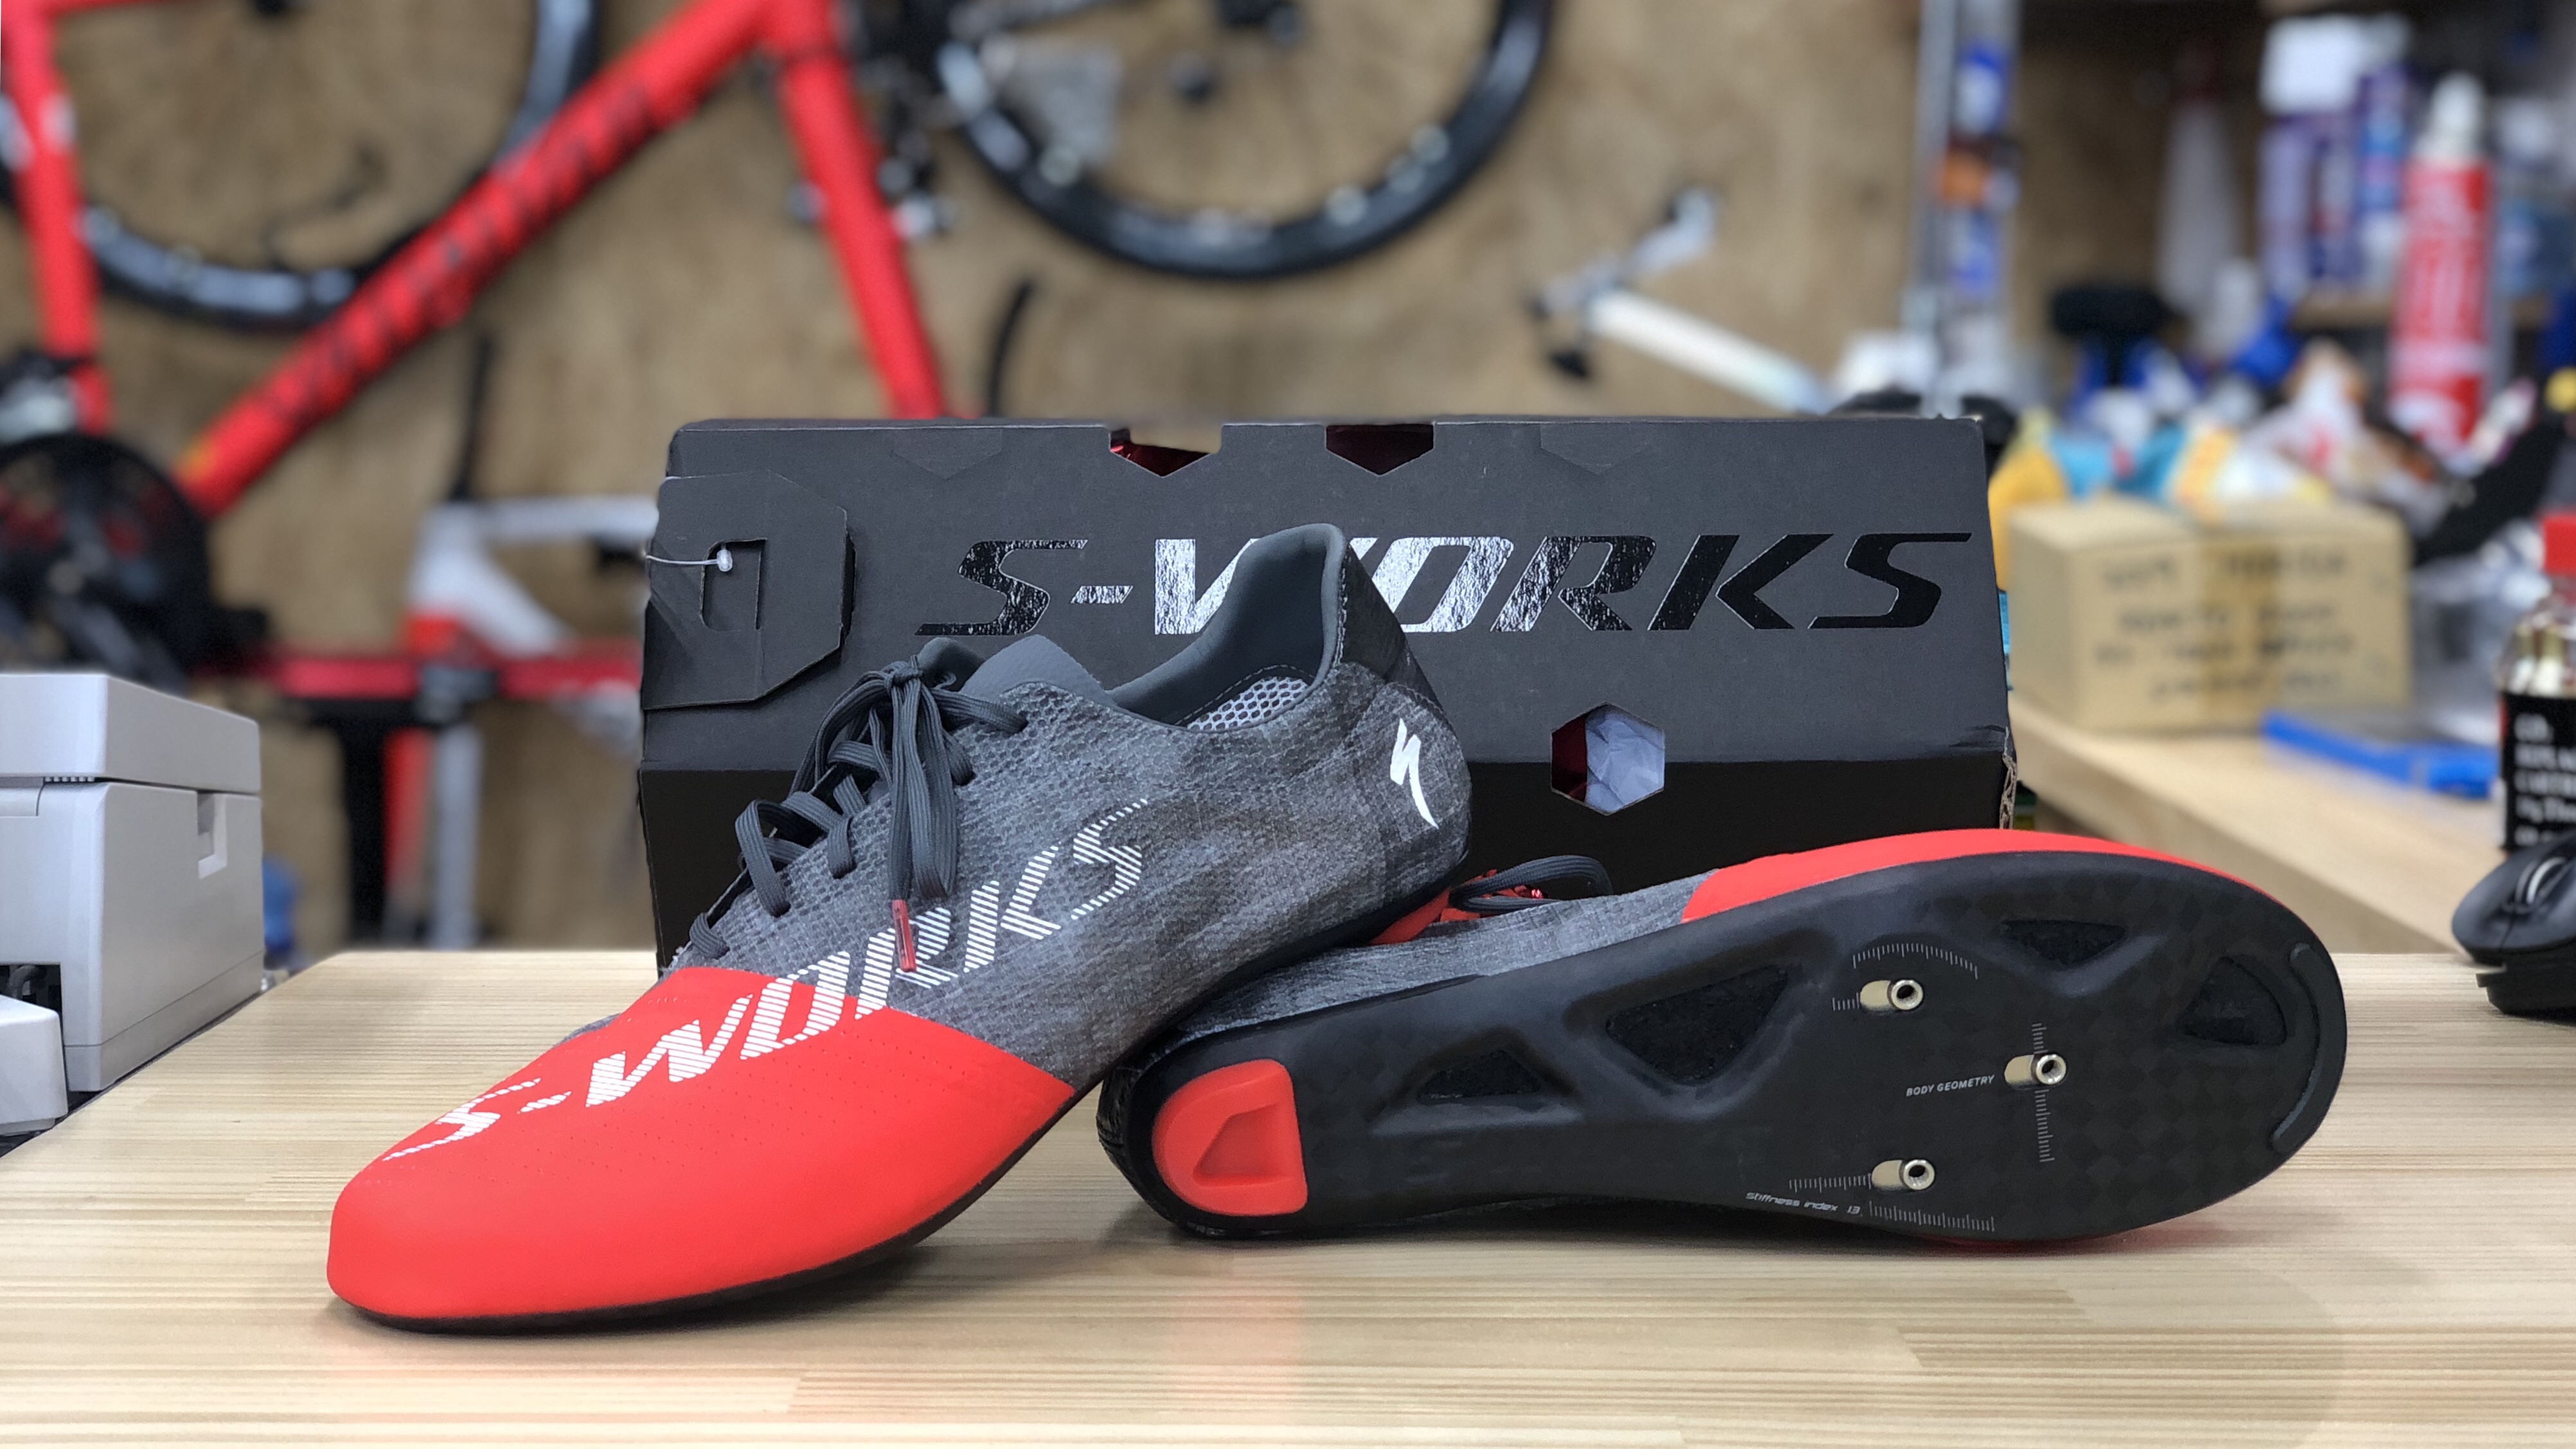 S-Works EXOS 99 Road Shoes – LTD